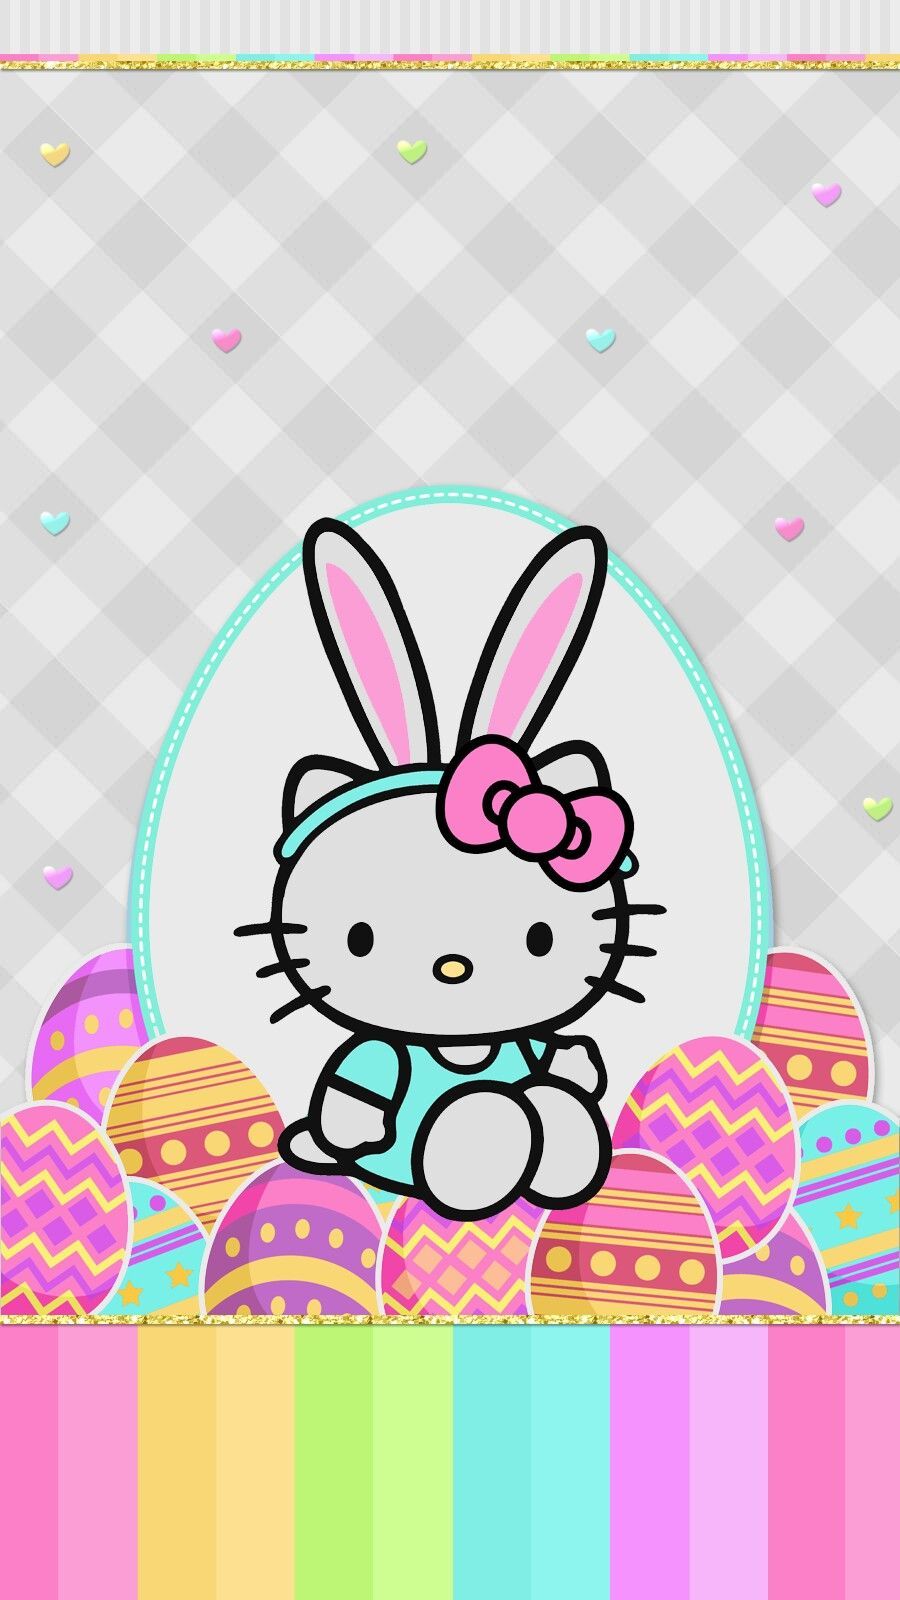 Happy easter. Hello kitty iphone wallpaper, Hello kitty wallpaper, Hello kitty background